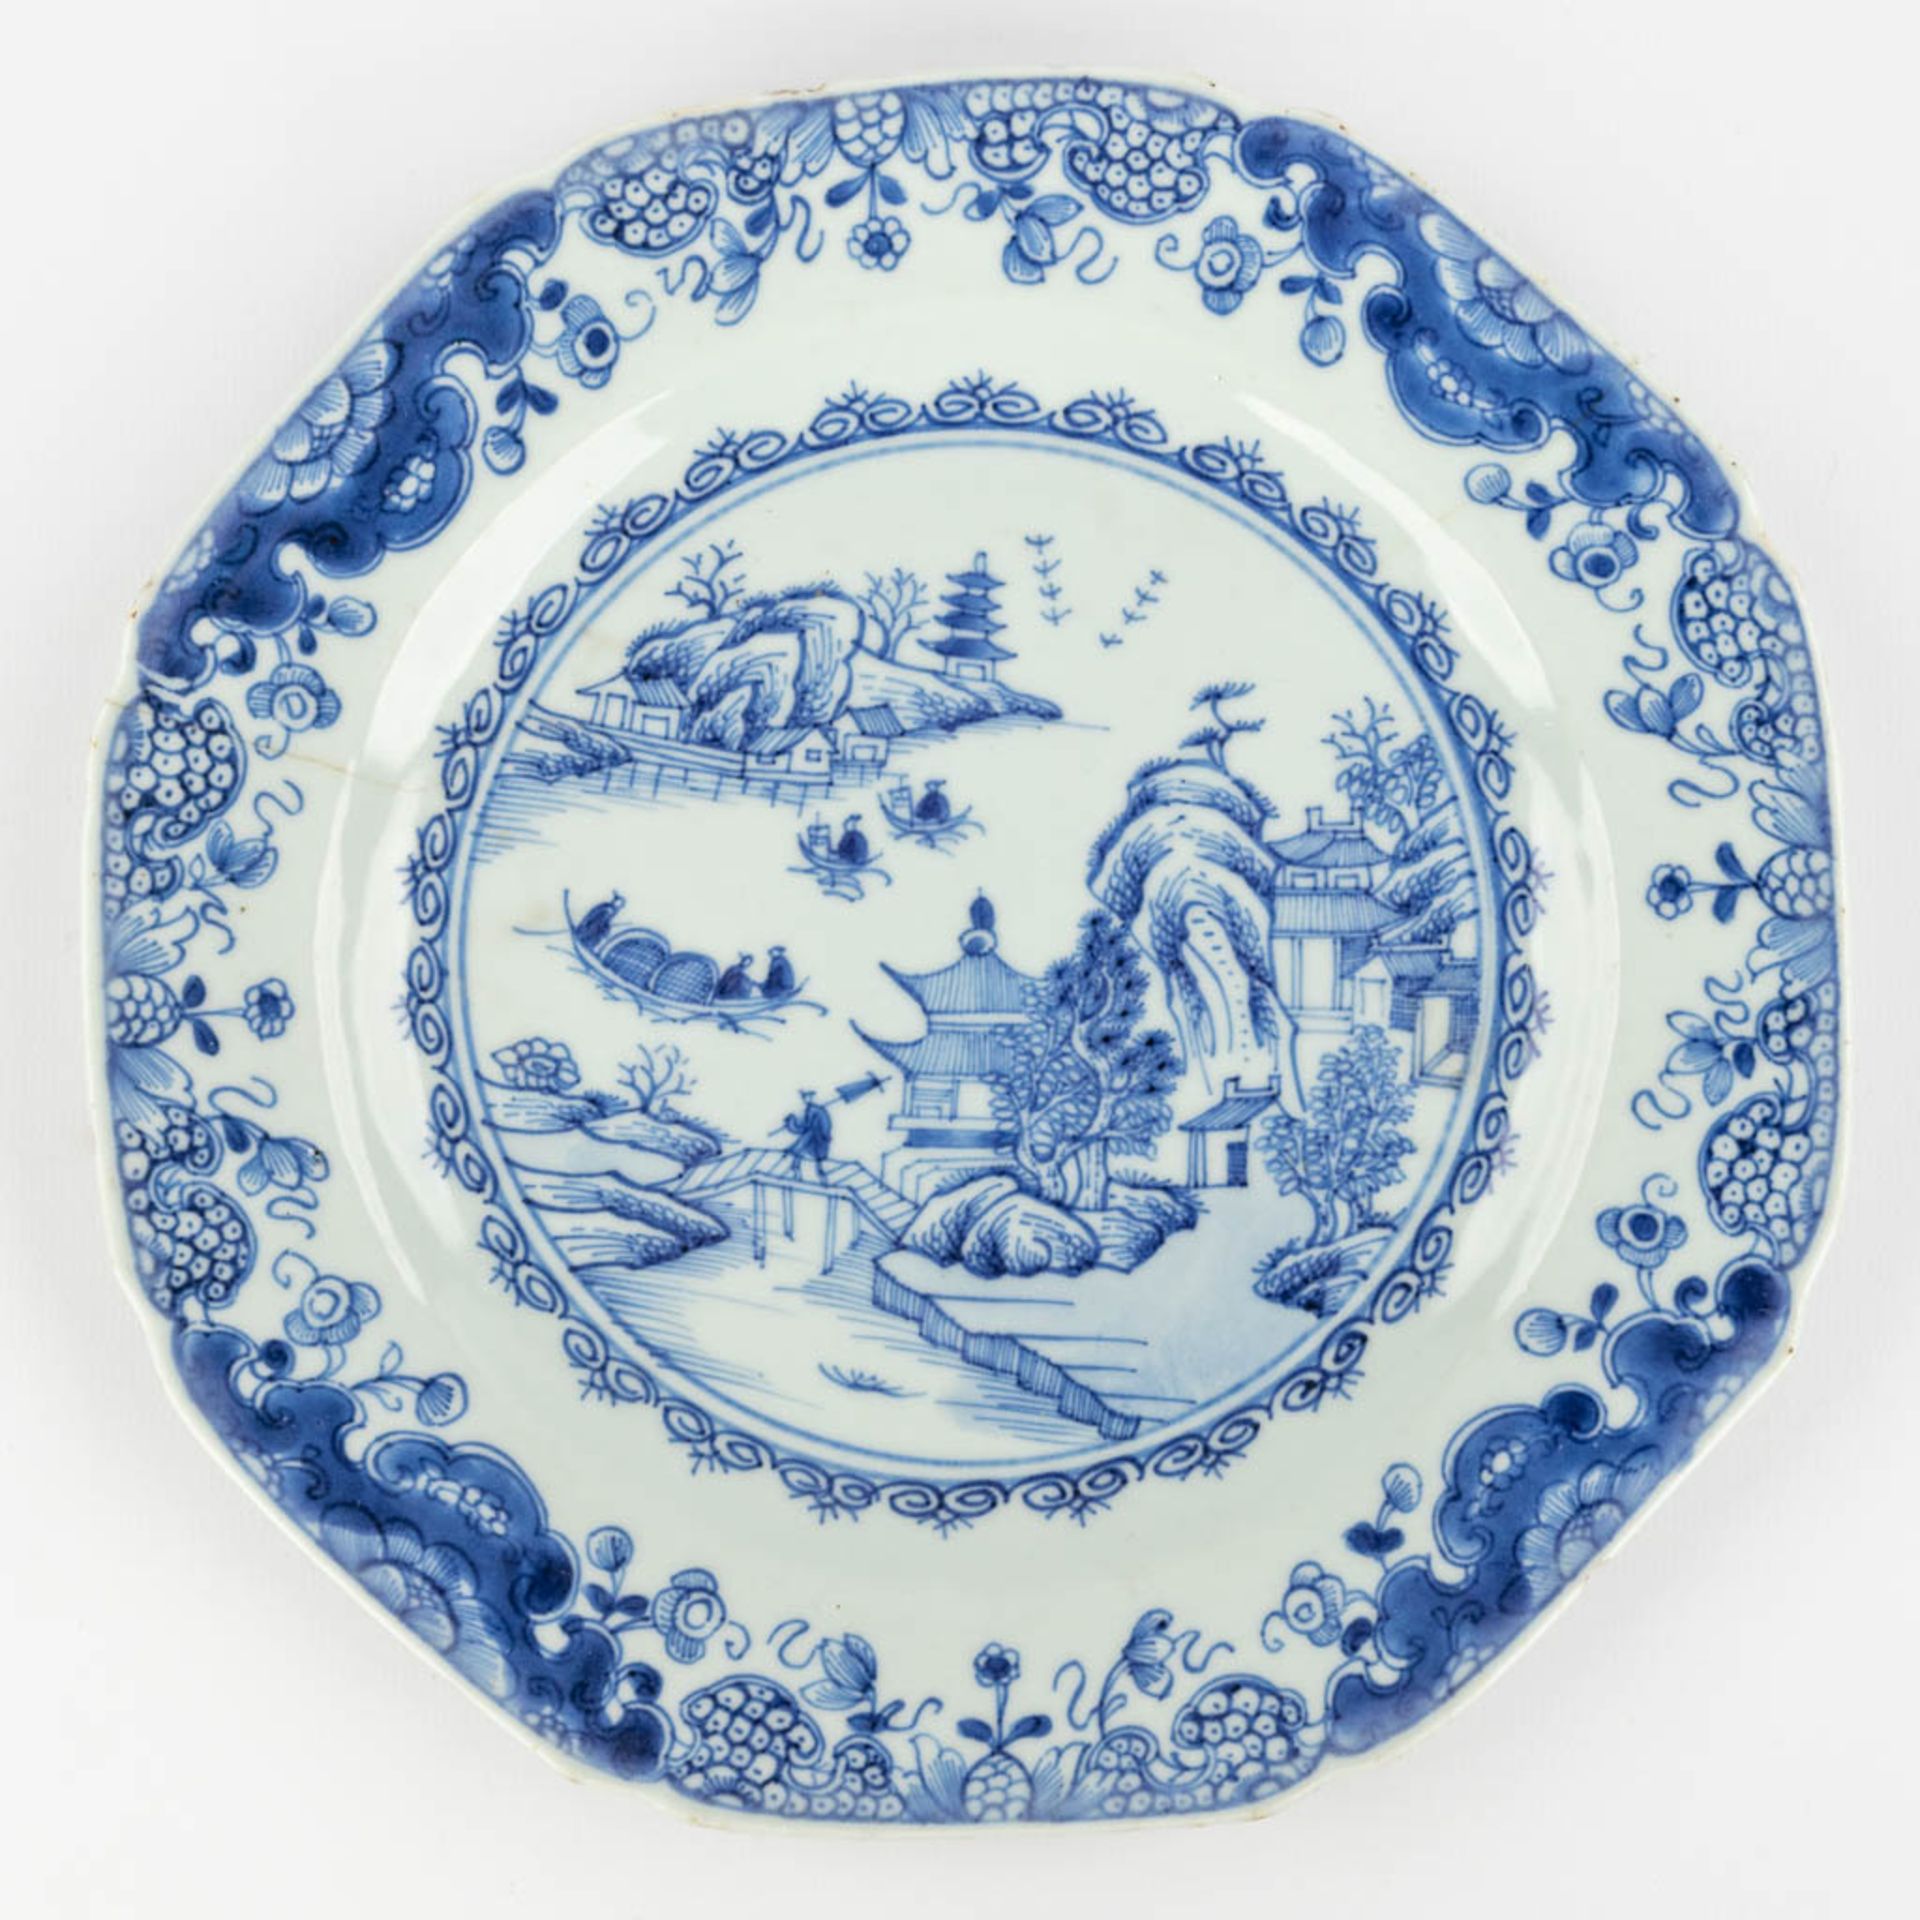 A collection of 7 Chinese plates and platters made of blue-white porcelain. (34 x 40,5 cm) - Image 17 of 23